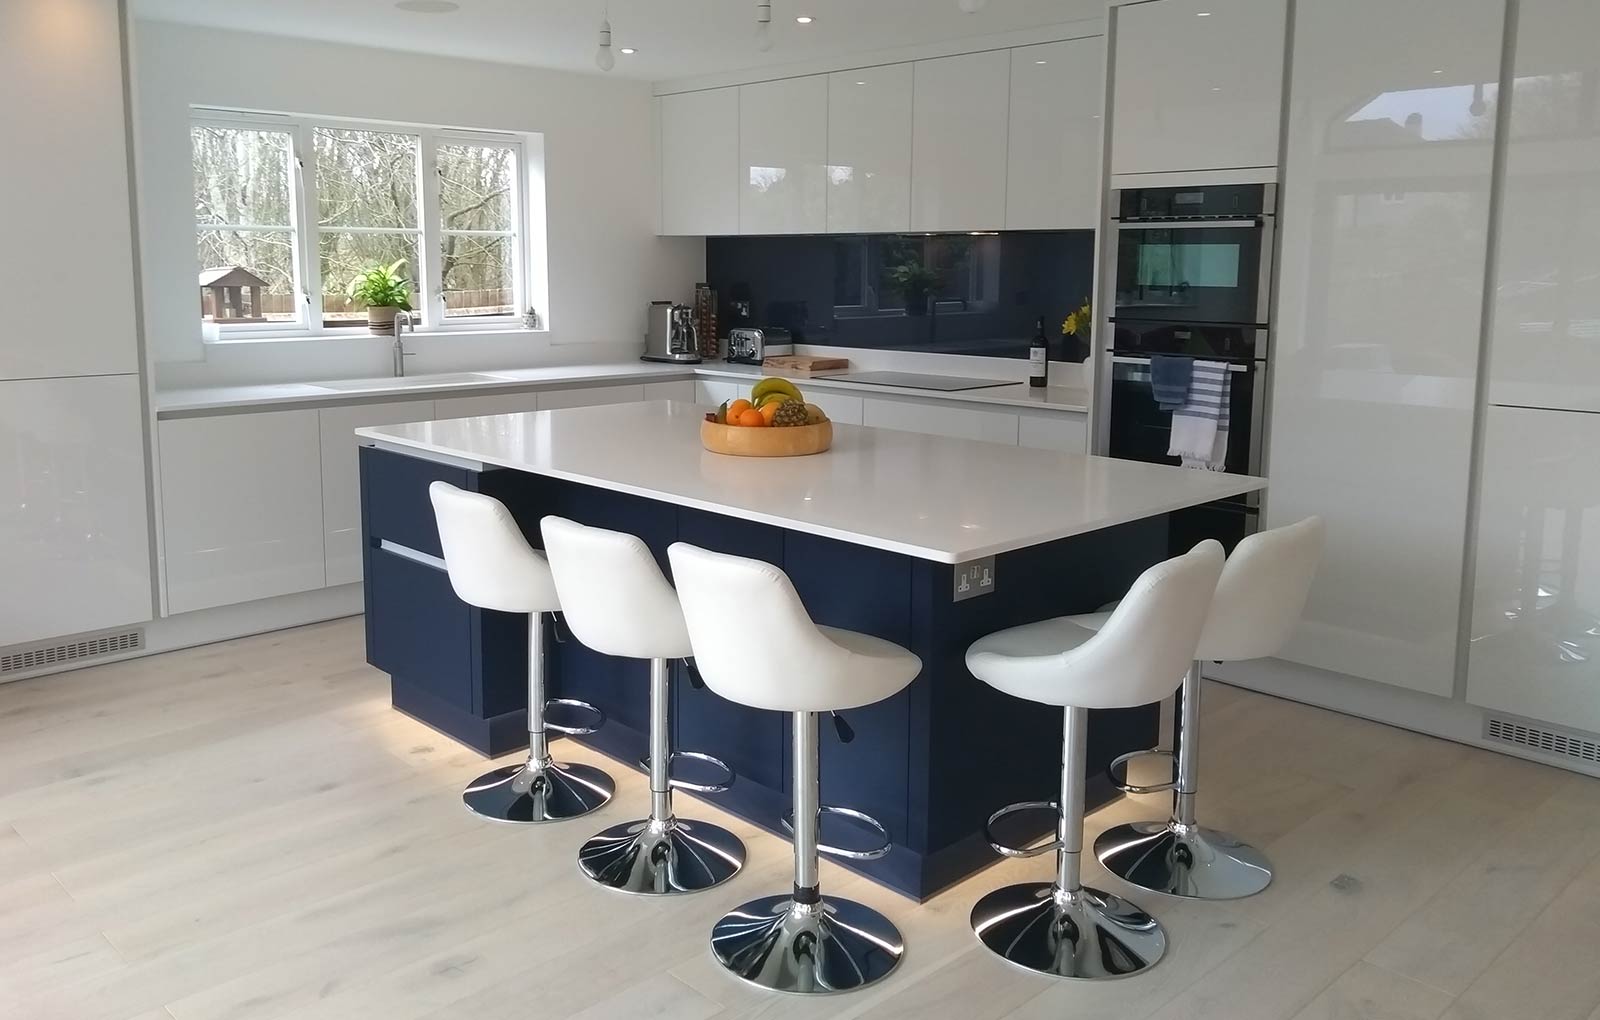 4 Ideas For The Perfect Handleless Kitchen Design - Find Your Kitchen ...